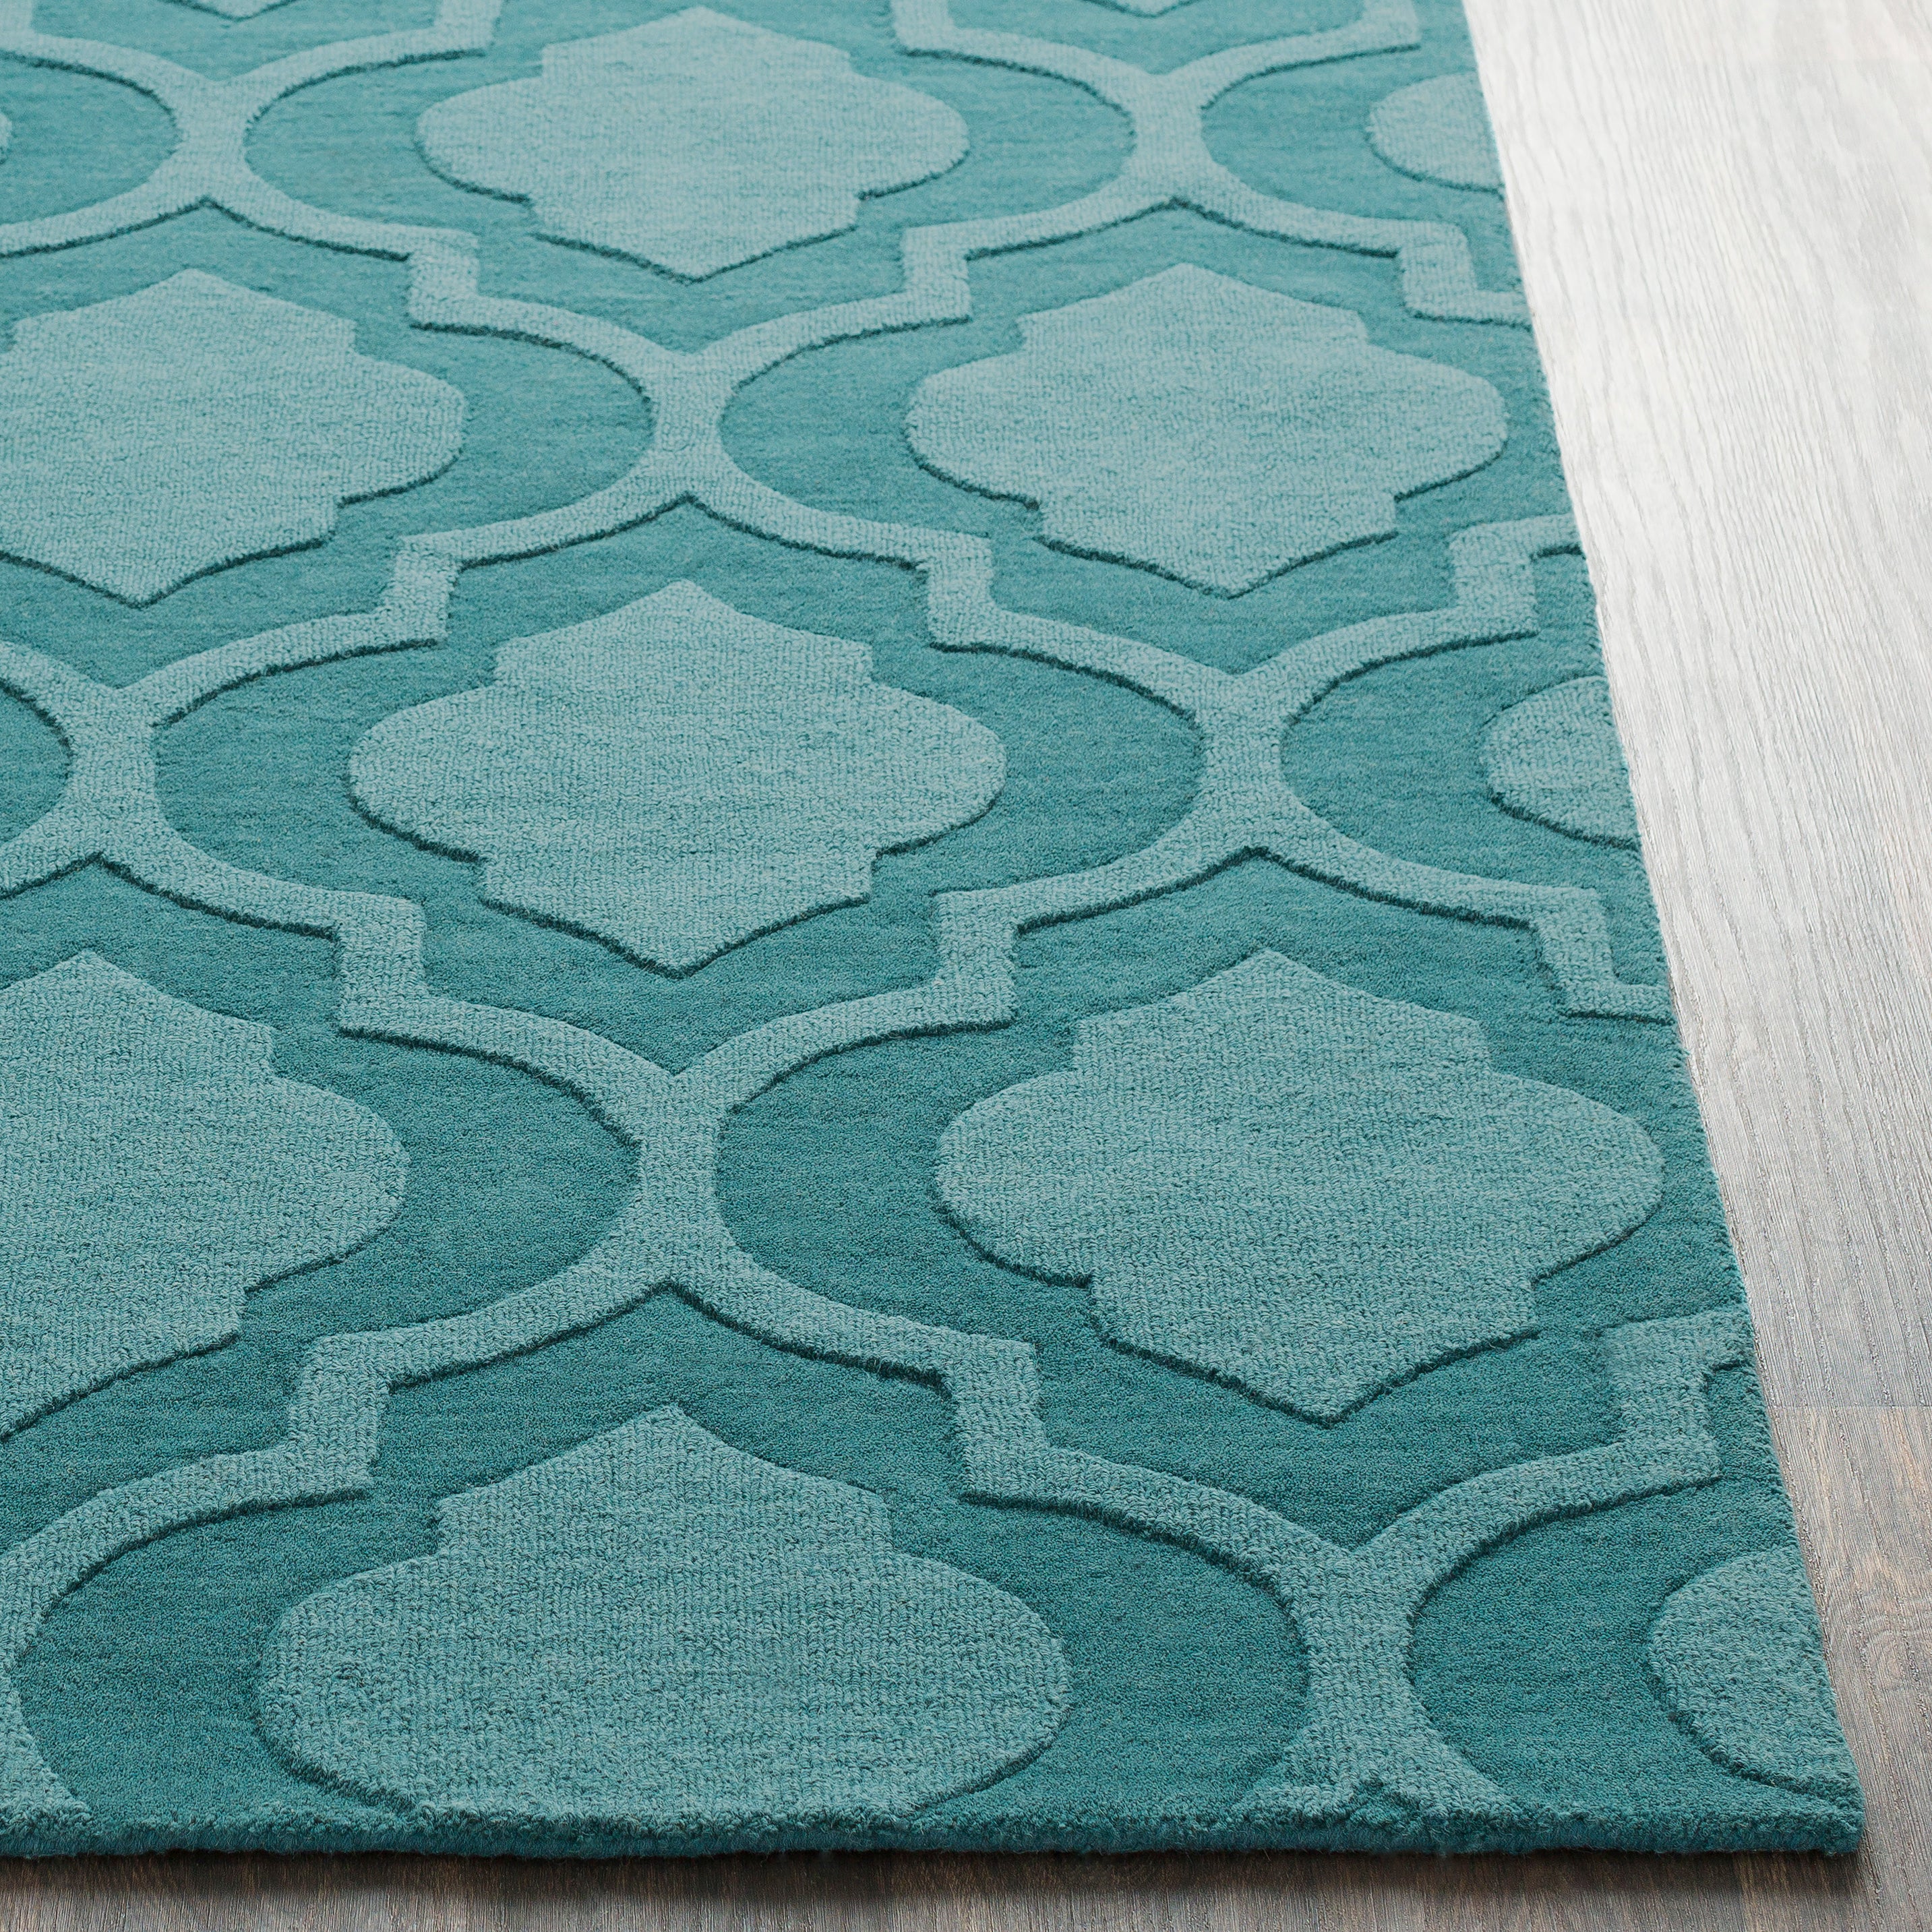 Surya Central Park Solid Blue AWHP-4010 Area Rug